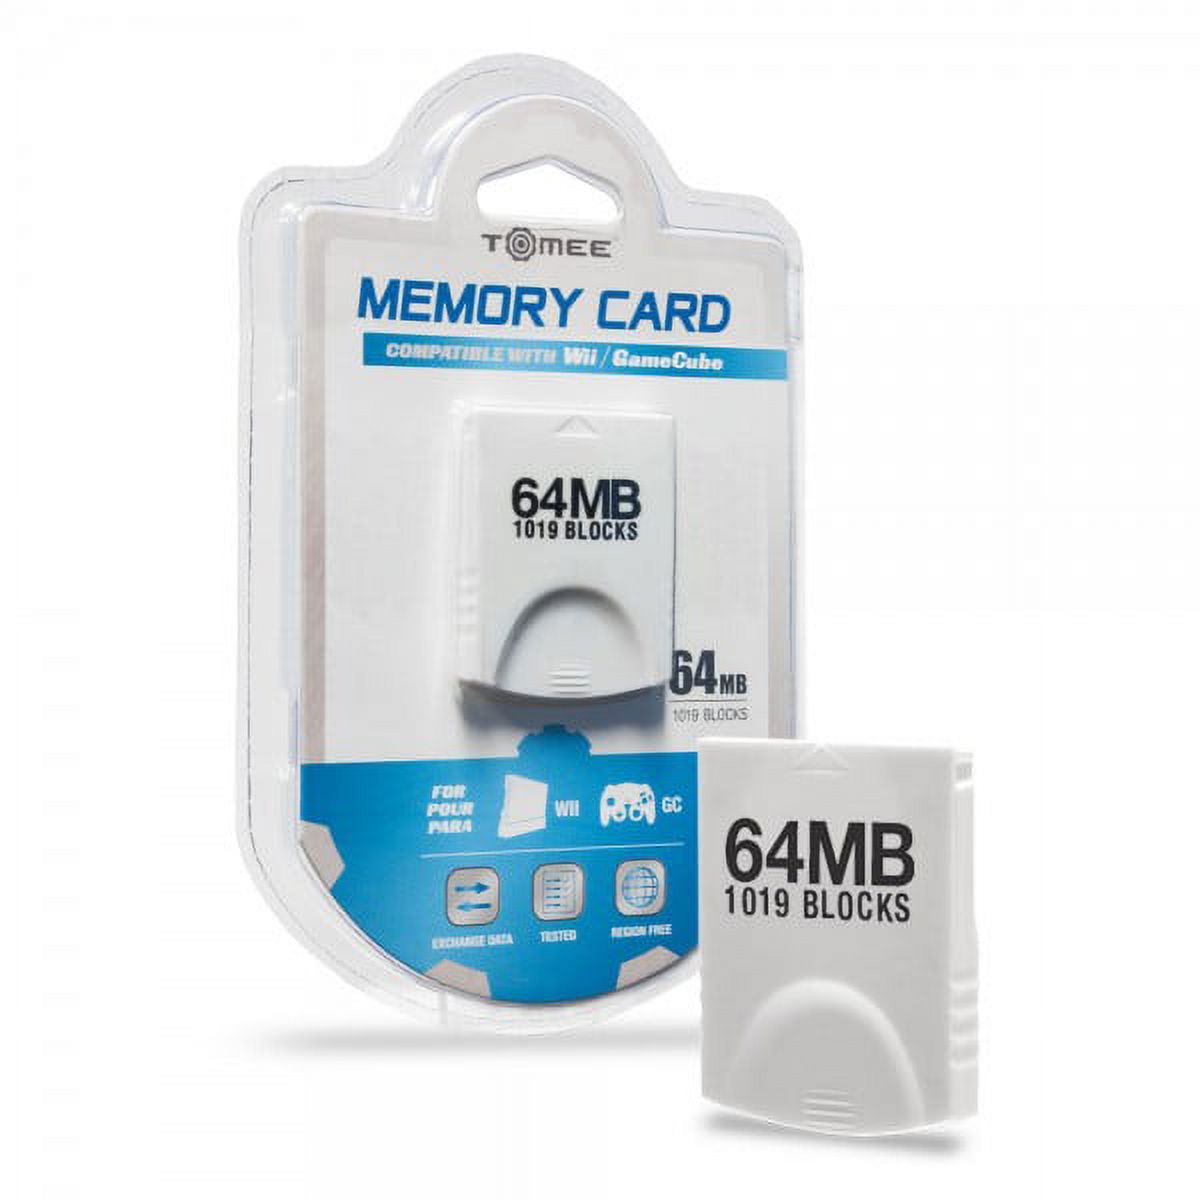 Tomee 64MB Memory Card (1019 Blocks) for Nintendo Wii and GameCube - image 2 of 3